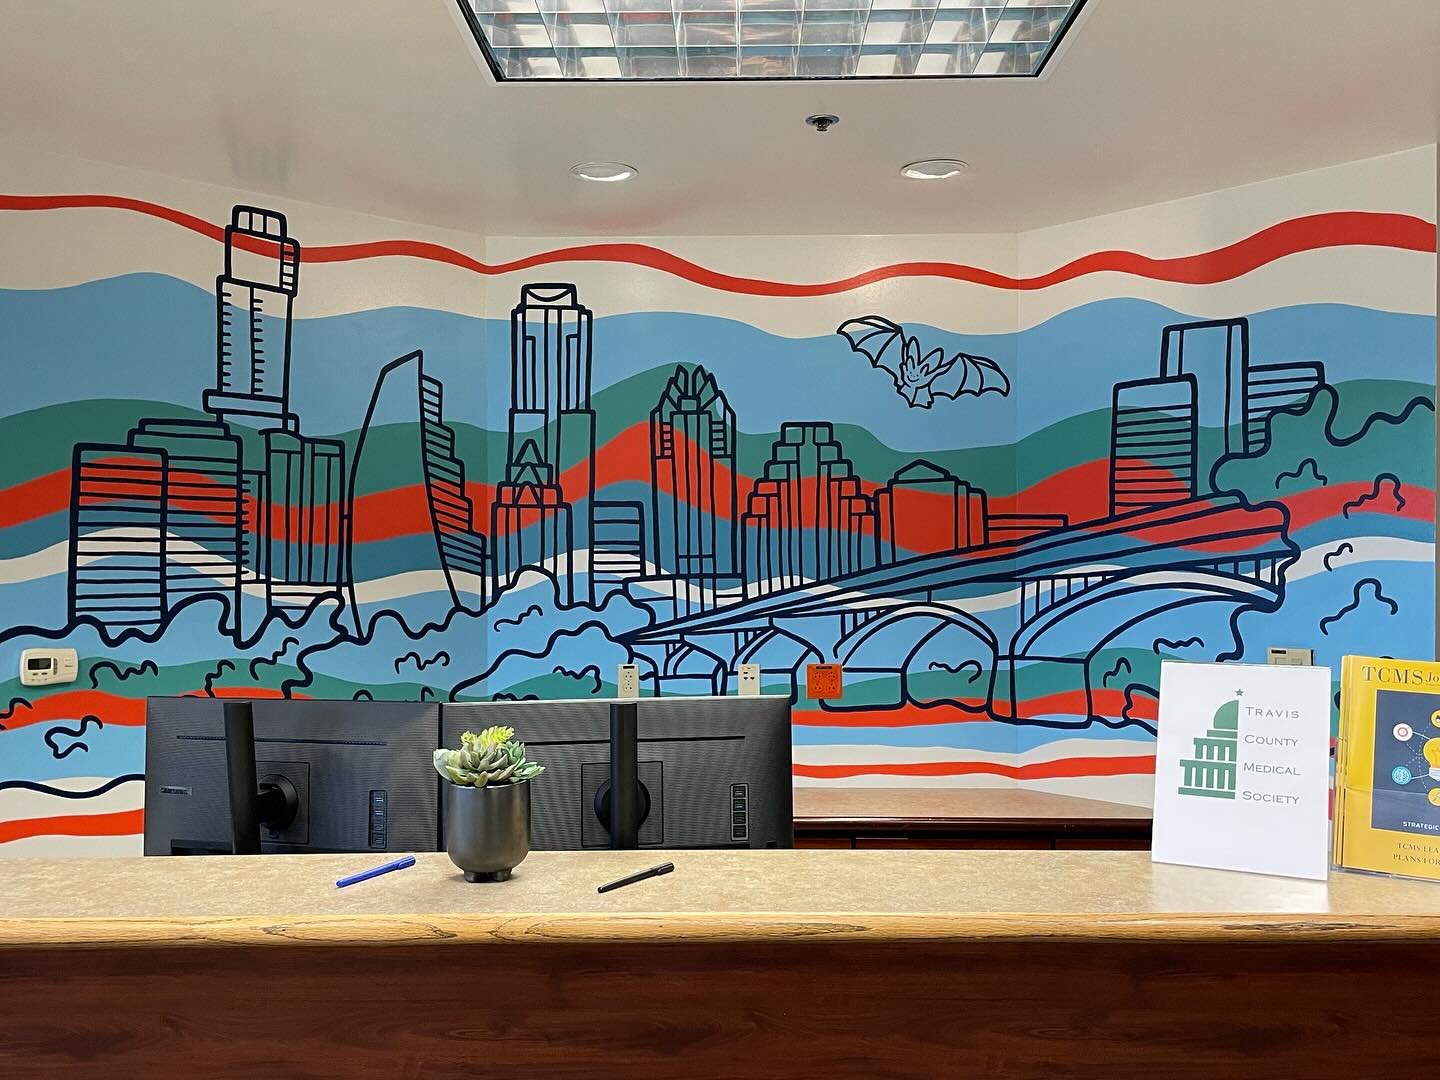 I love amazing repeat clients! It was an honor to paint more murals for @wearebloodtx, these ones at their North Lamar location. Thank yall for having me back!
&bull;
#weareblood #averyodesign #atxmurals #atxmuralist #austinmurals #mural #muralartist